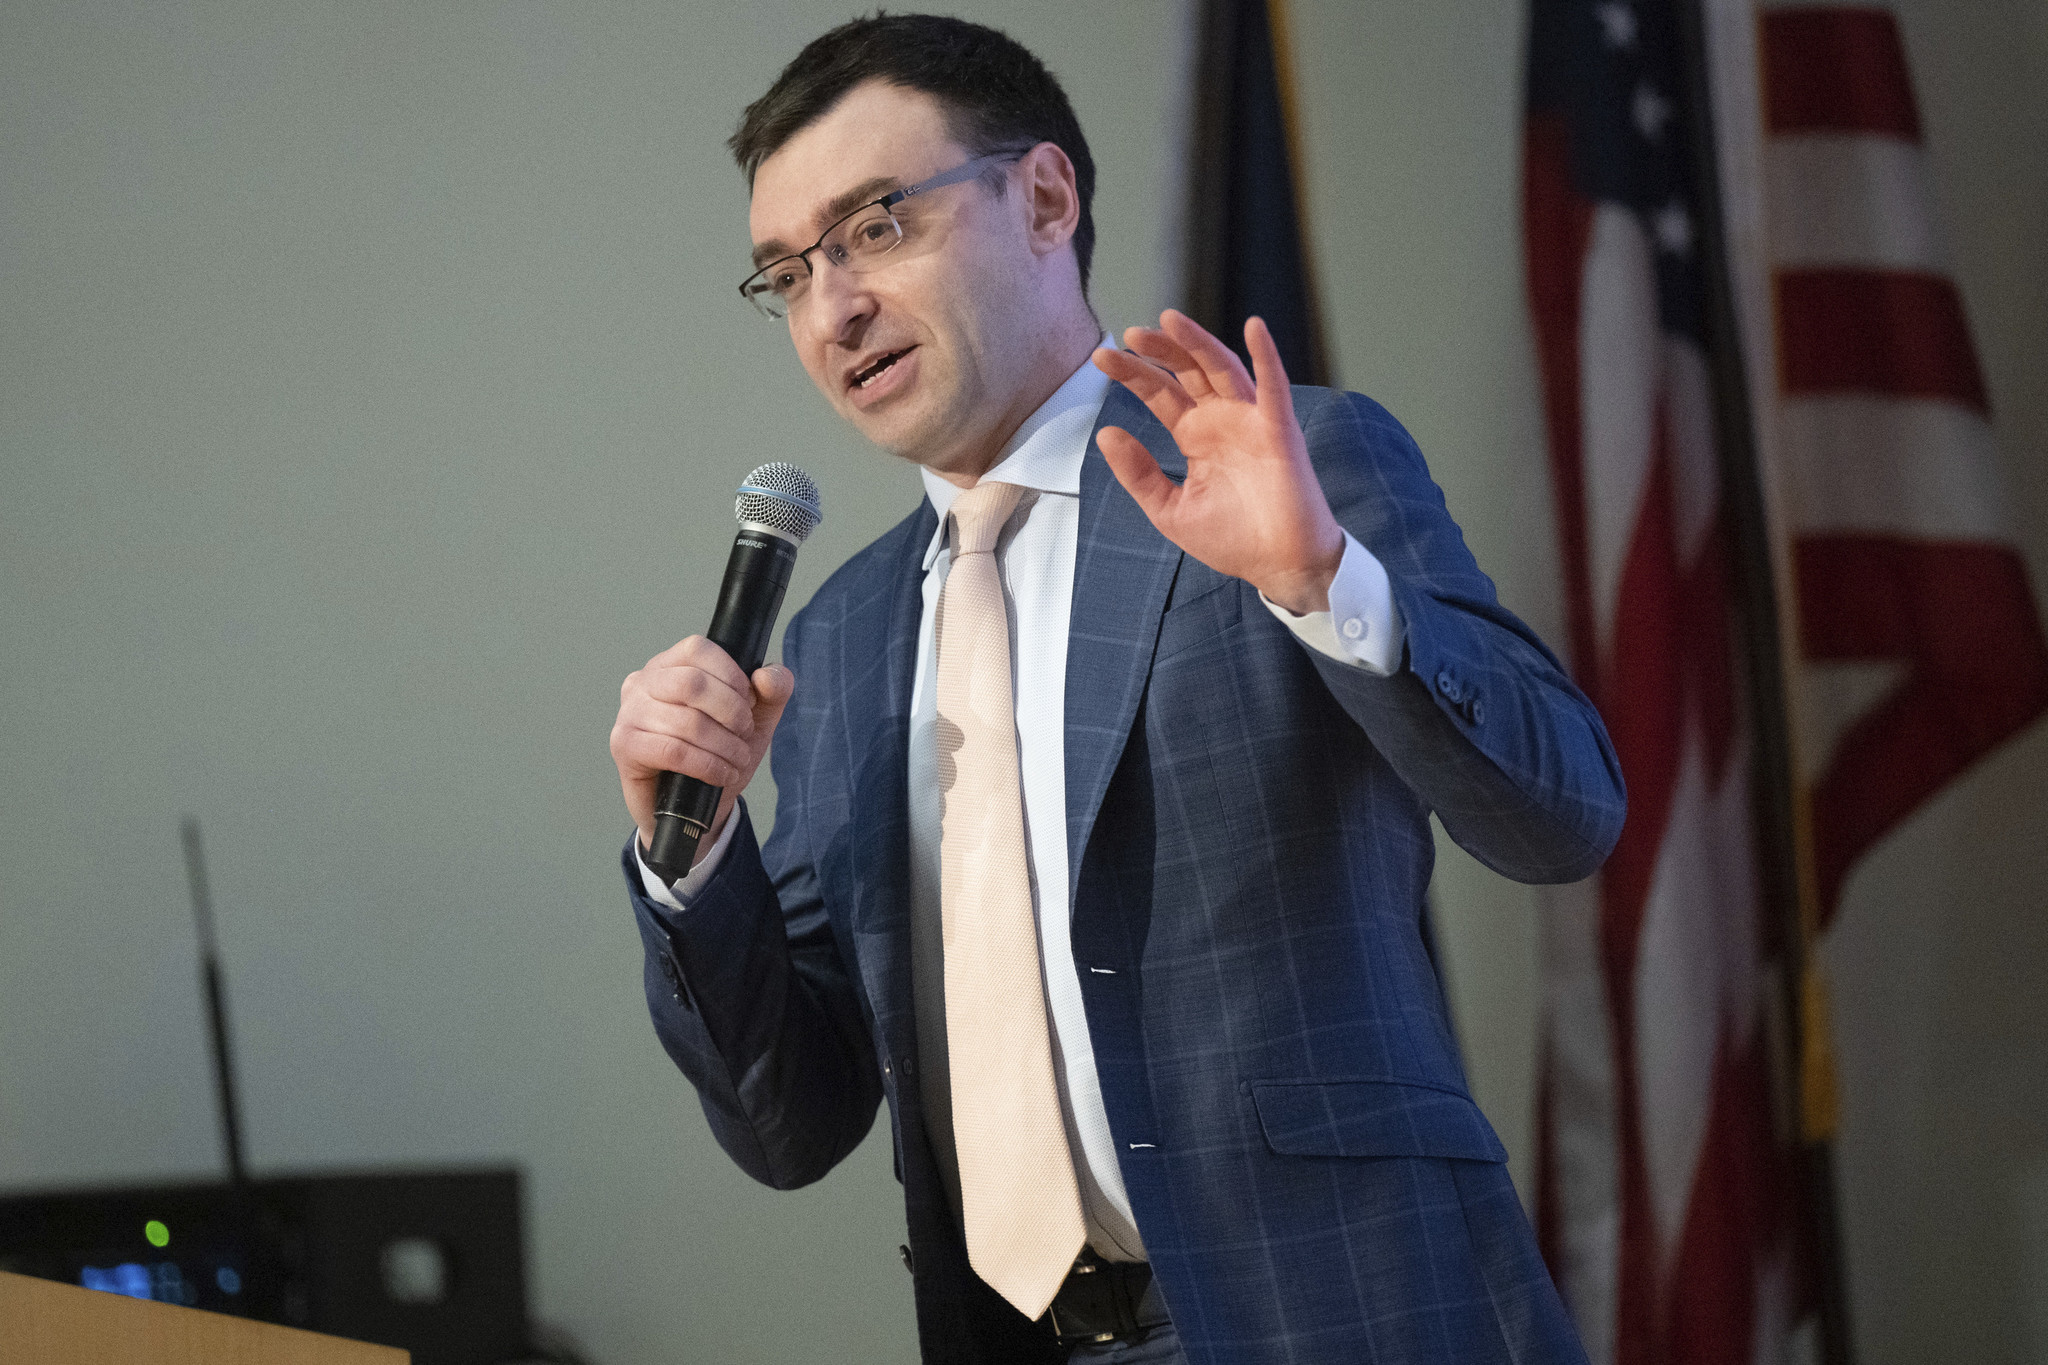 Sports announcer Jason Benetti on being a voice for those with